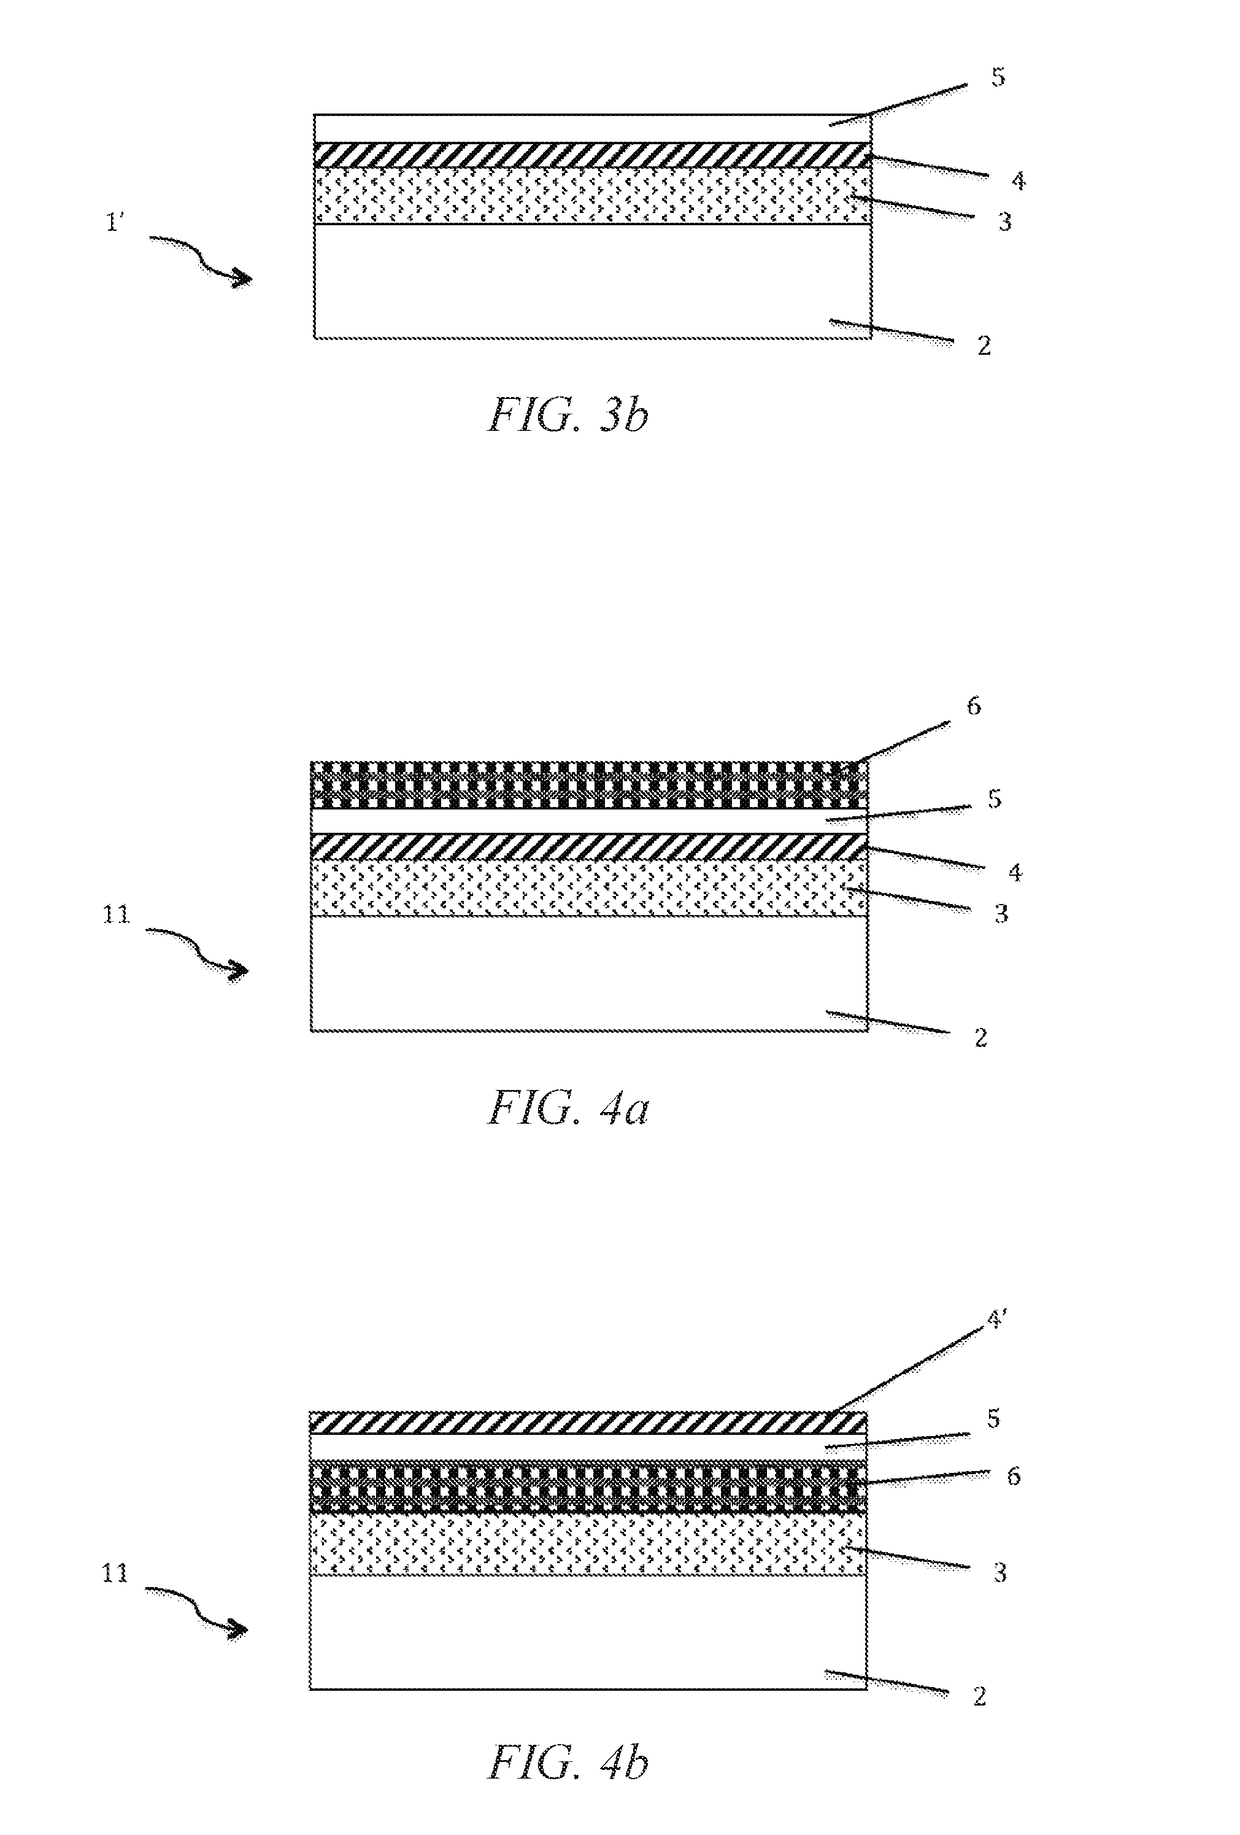 Structure for radiofrequency applications